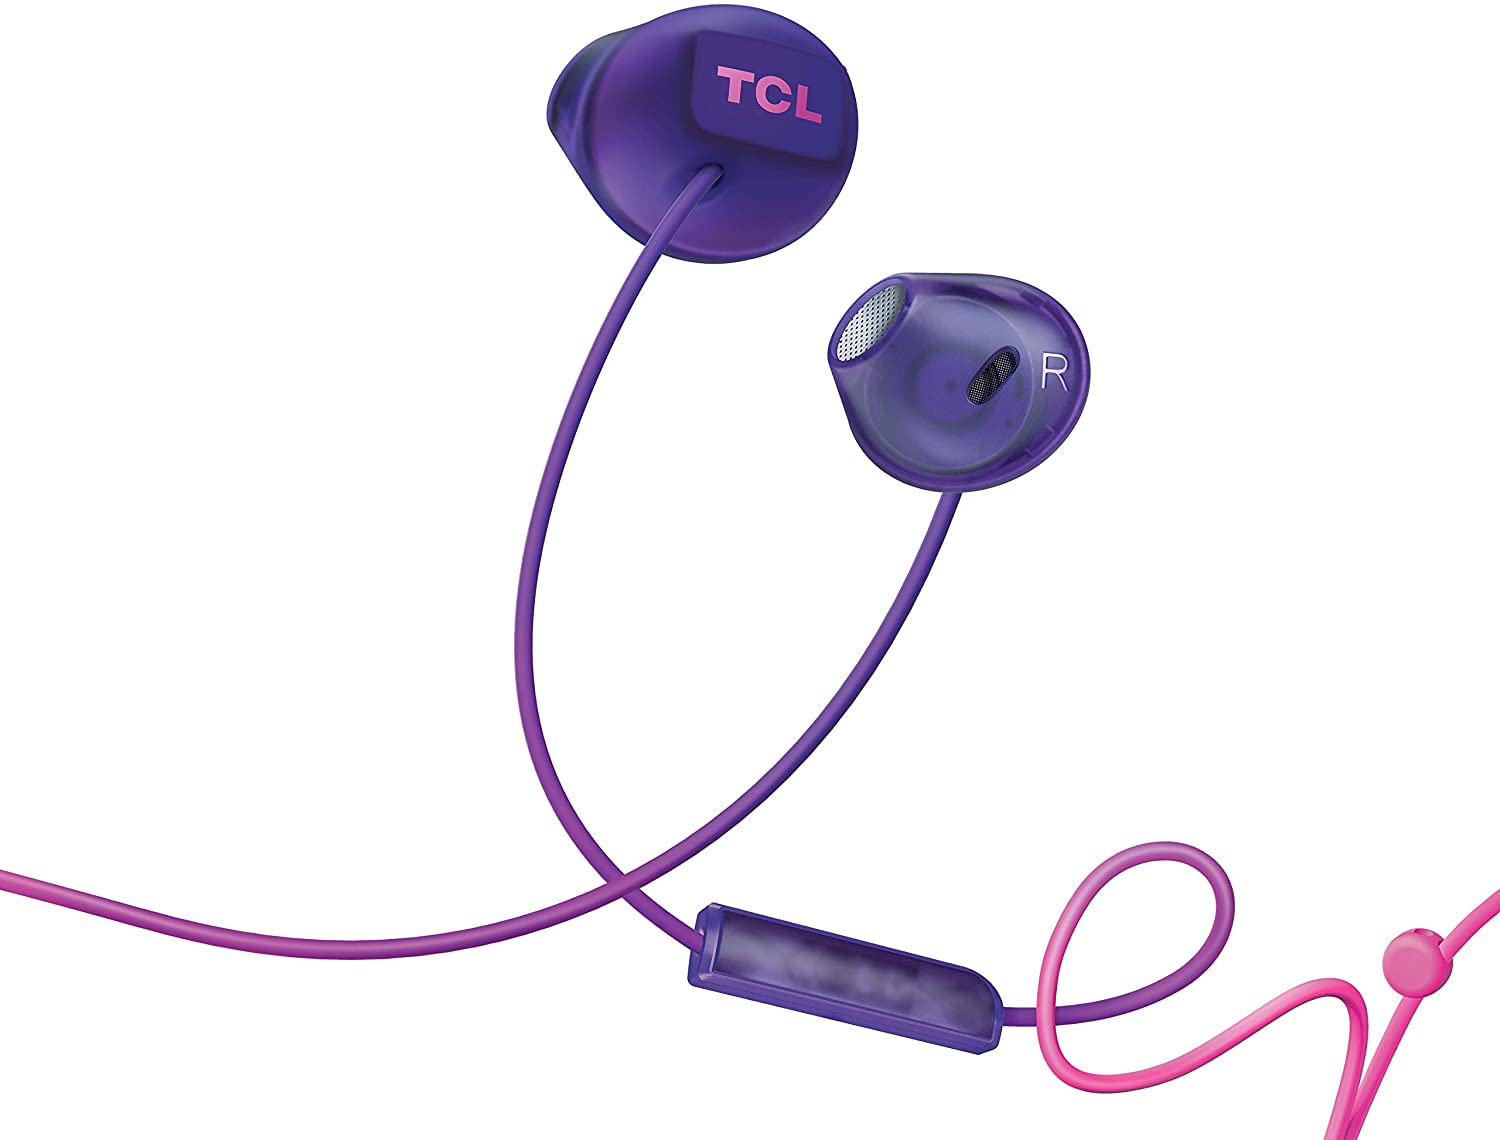 ''TCL SOCL200 In-Ear Earbuds Wired HEADPHONES with 12.2mm Speaker Drivers for Rich Bass and Clear Sou